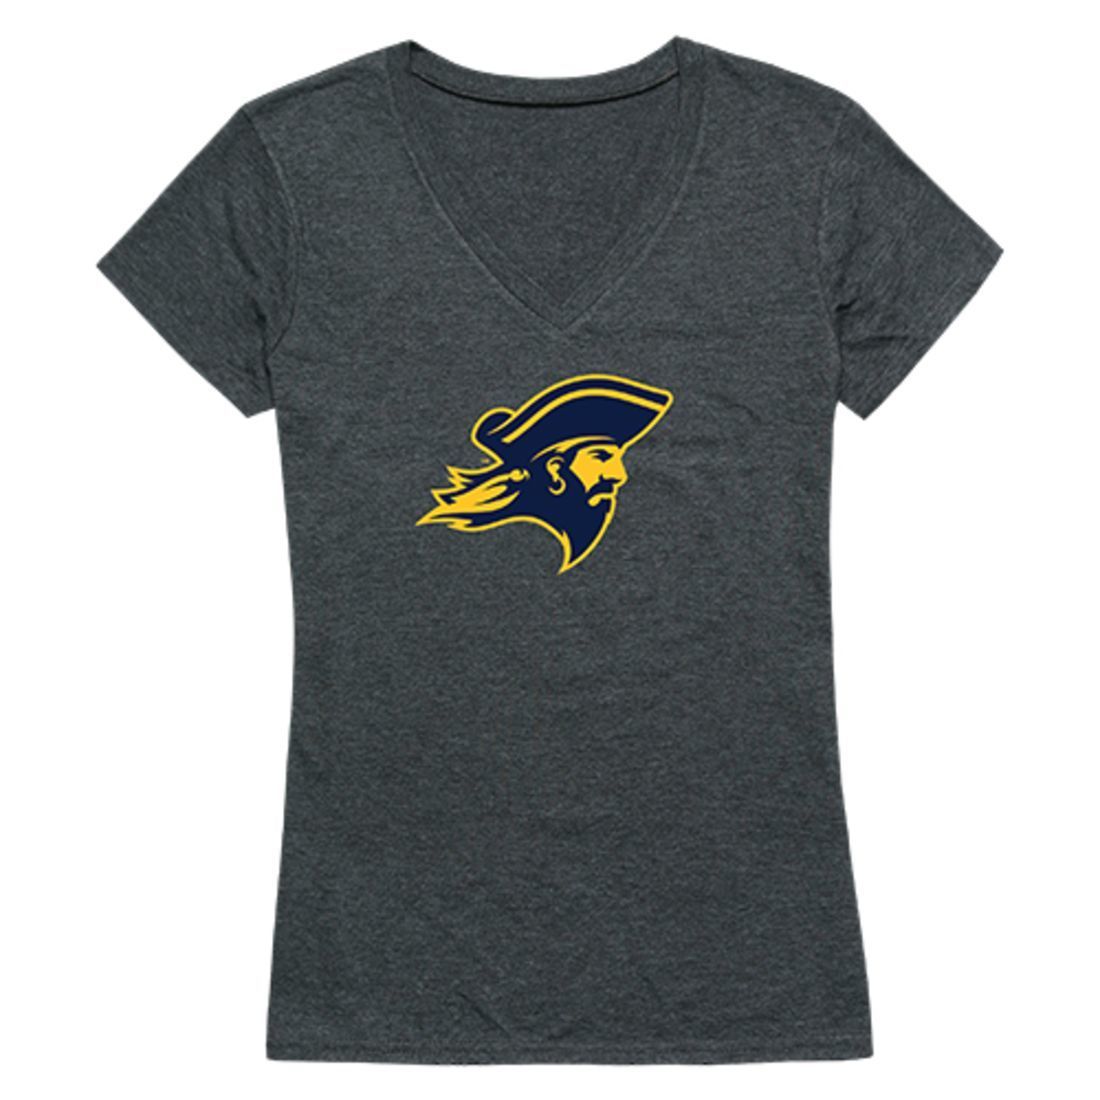 ETSU East Tennessee State University Buccaneers Womens Cinder T-Shirt Heather Charcoal-Campus-Wardrobe